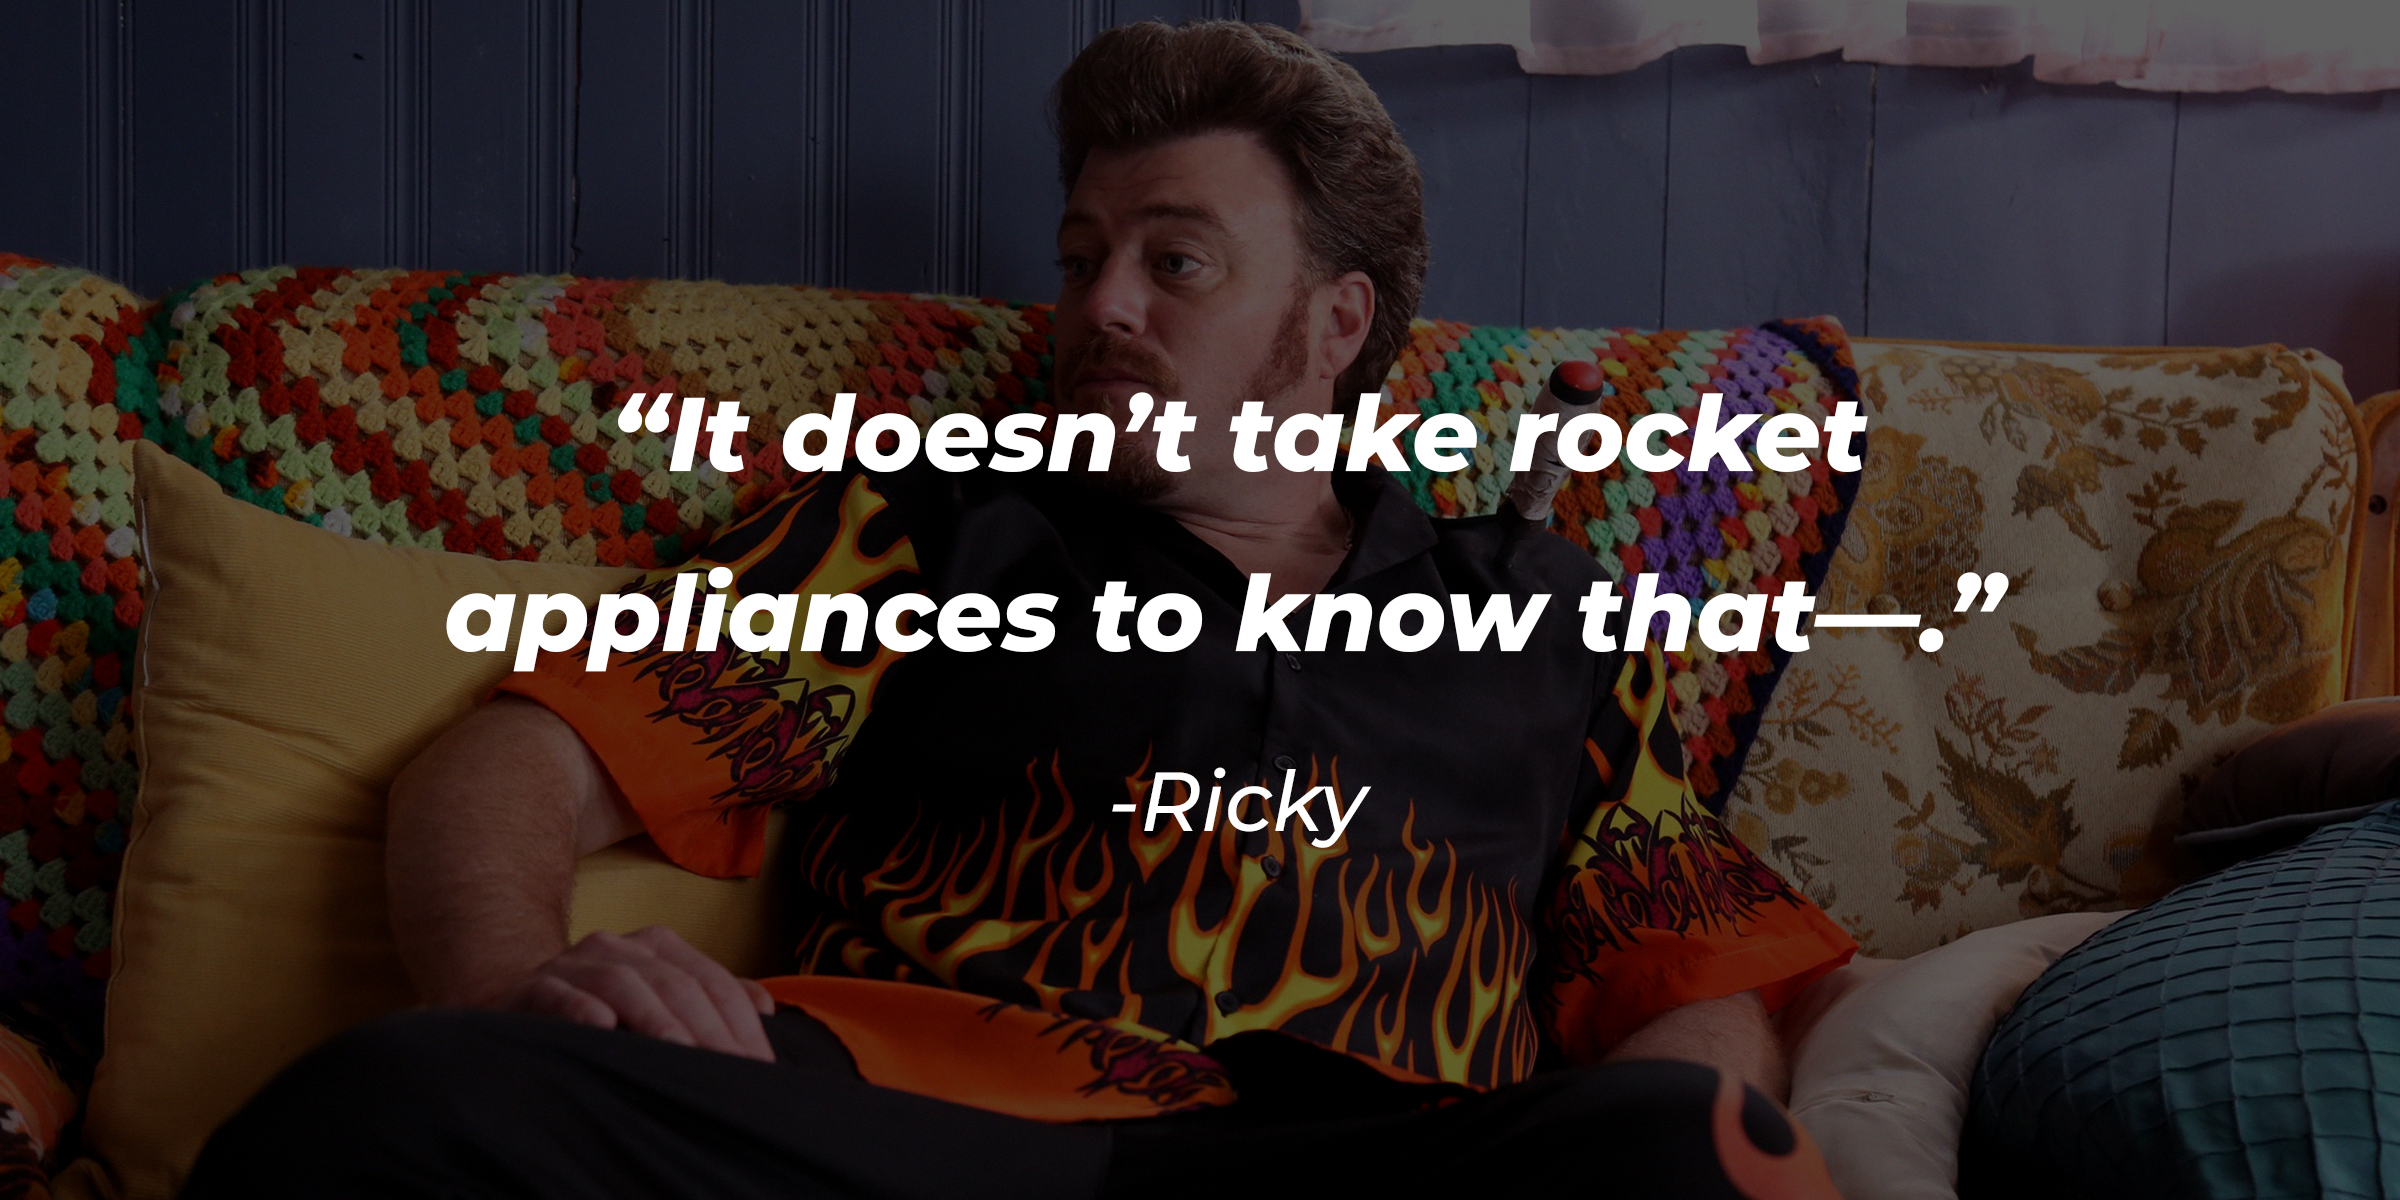 Ricky, with Ricky's quote: “It doesn’t take rocket appliances to know that—.” | Source: facebook.com/trailerparkboys